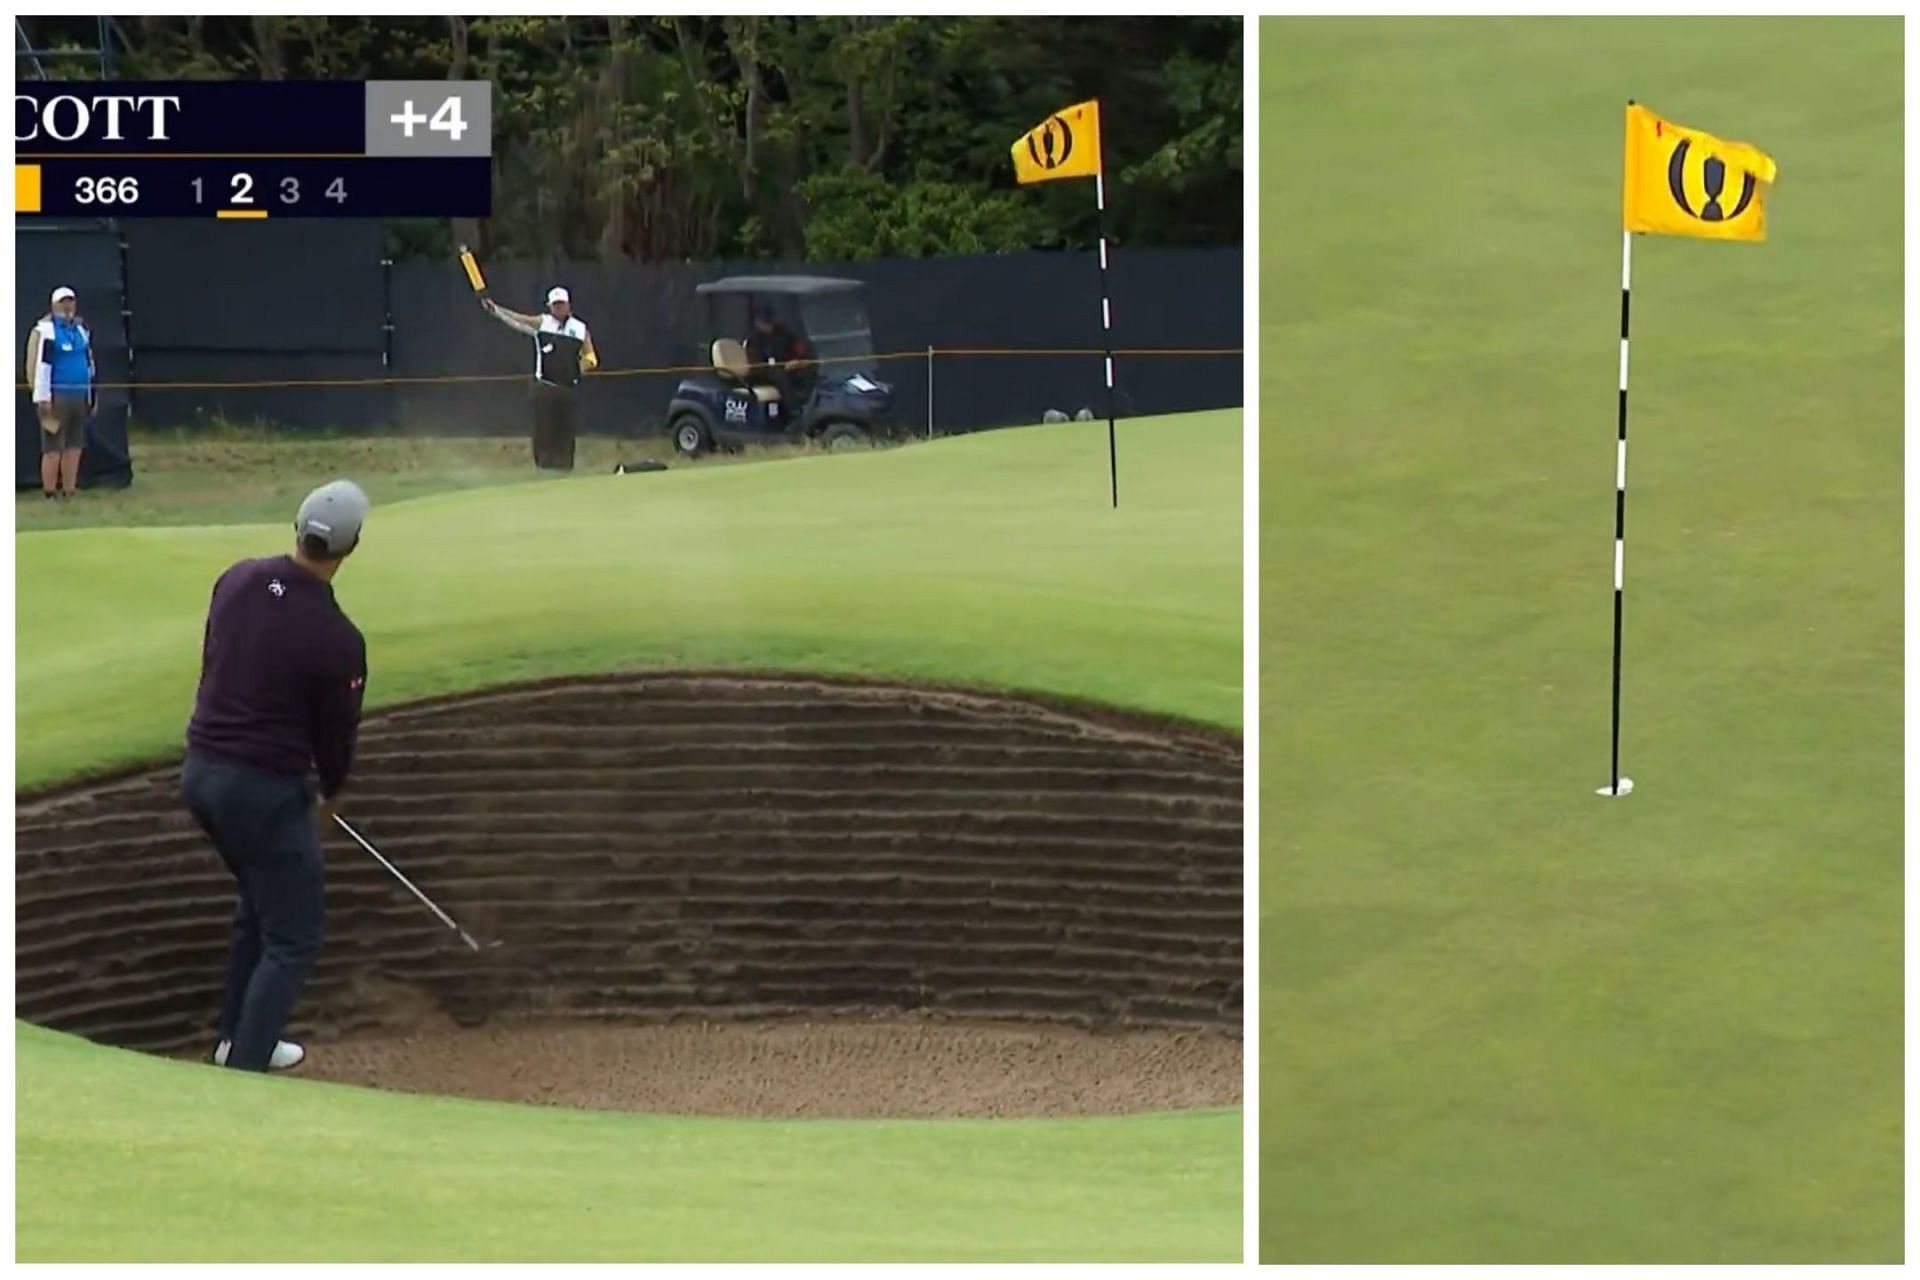 Adam Scott holes it for a birdie from the greenside bunker on the hole 4 during the final round of the Open Championship